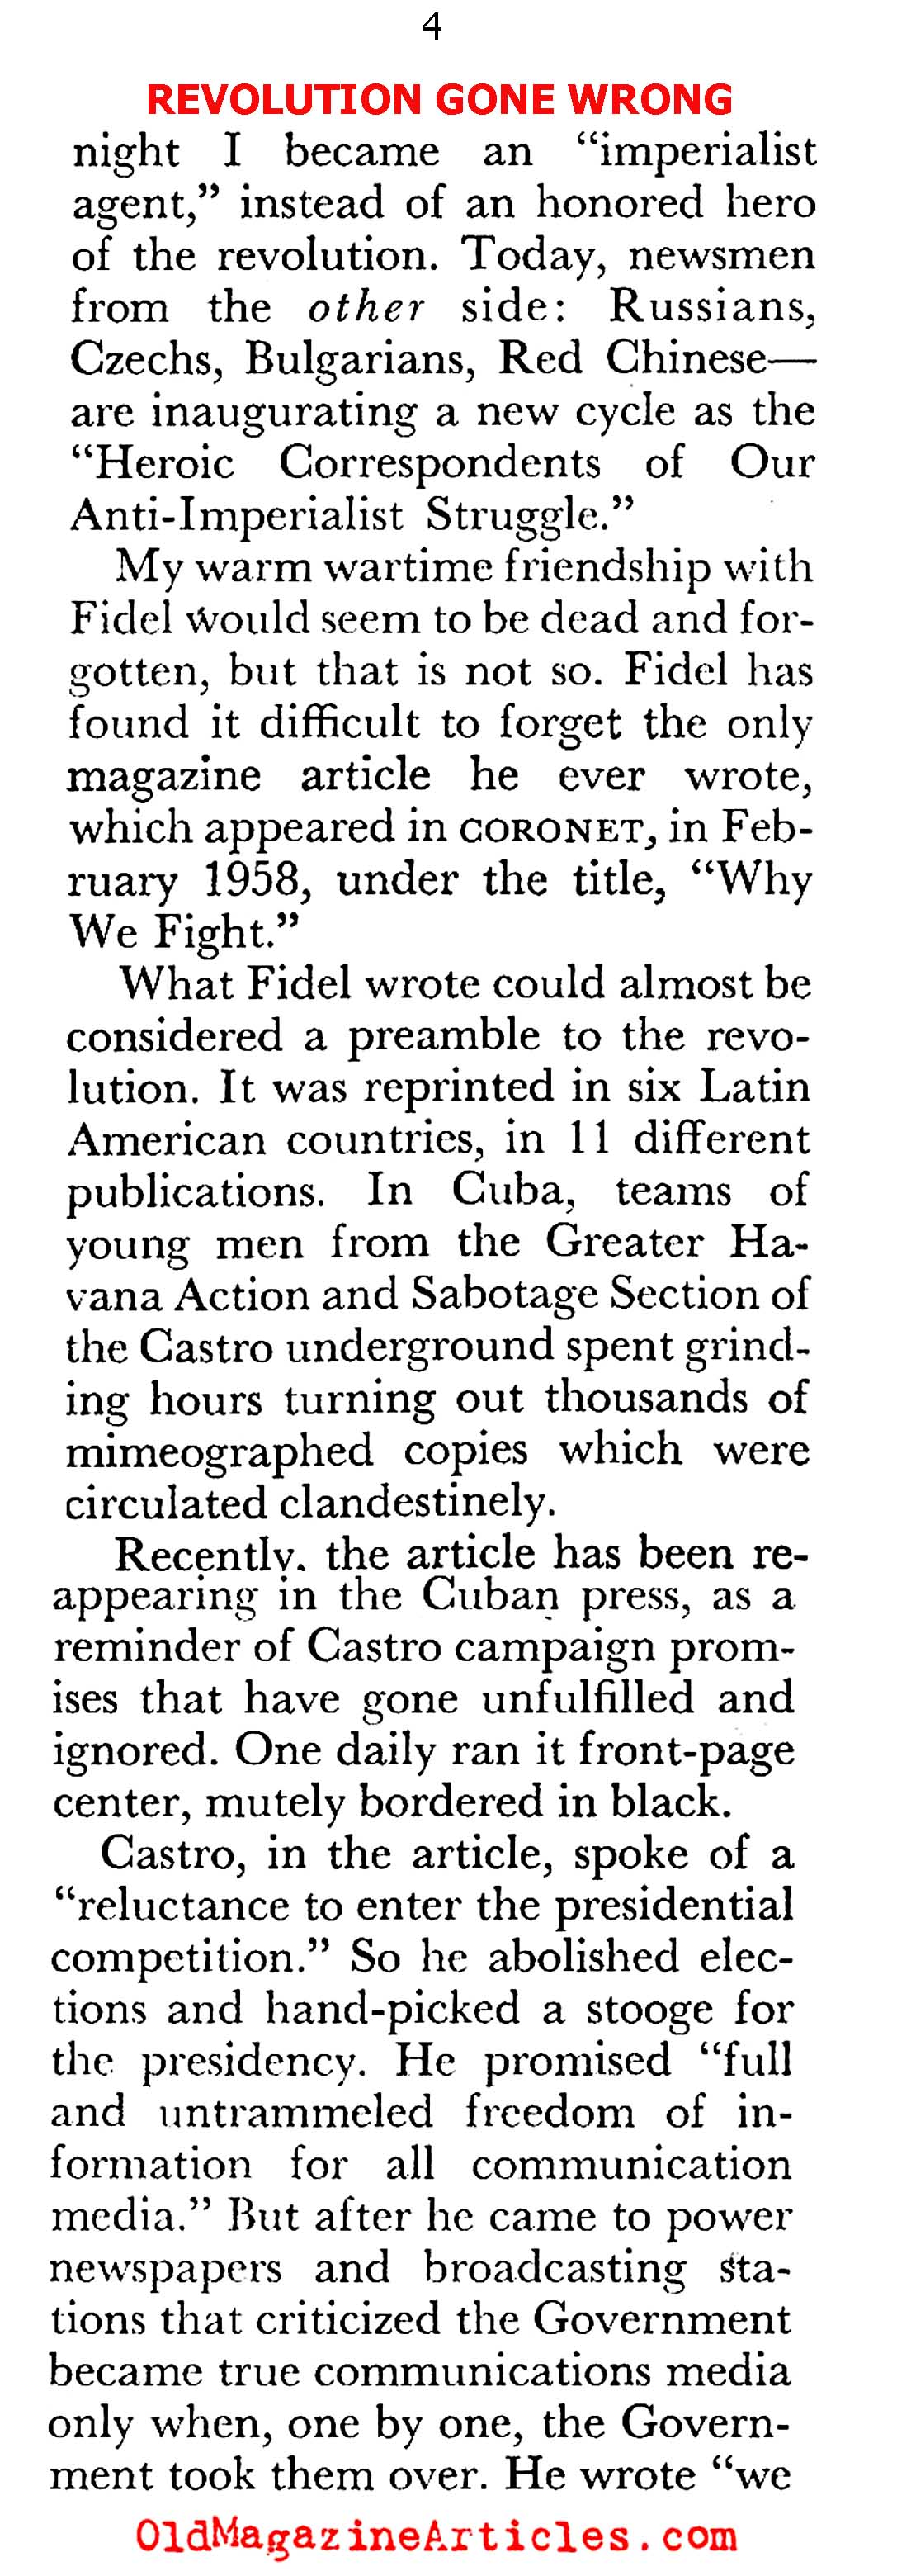 Castro Shows His Hand... (Pageant Magazine, 1960)